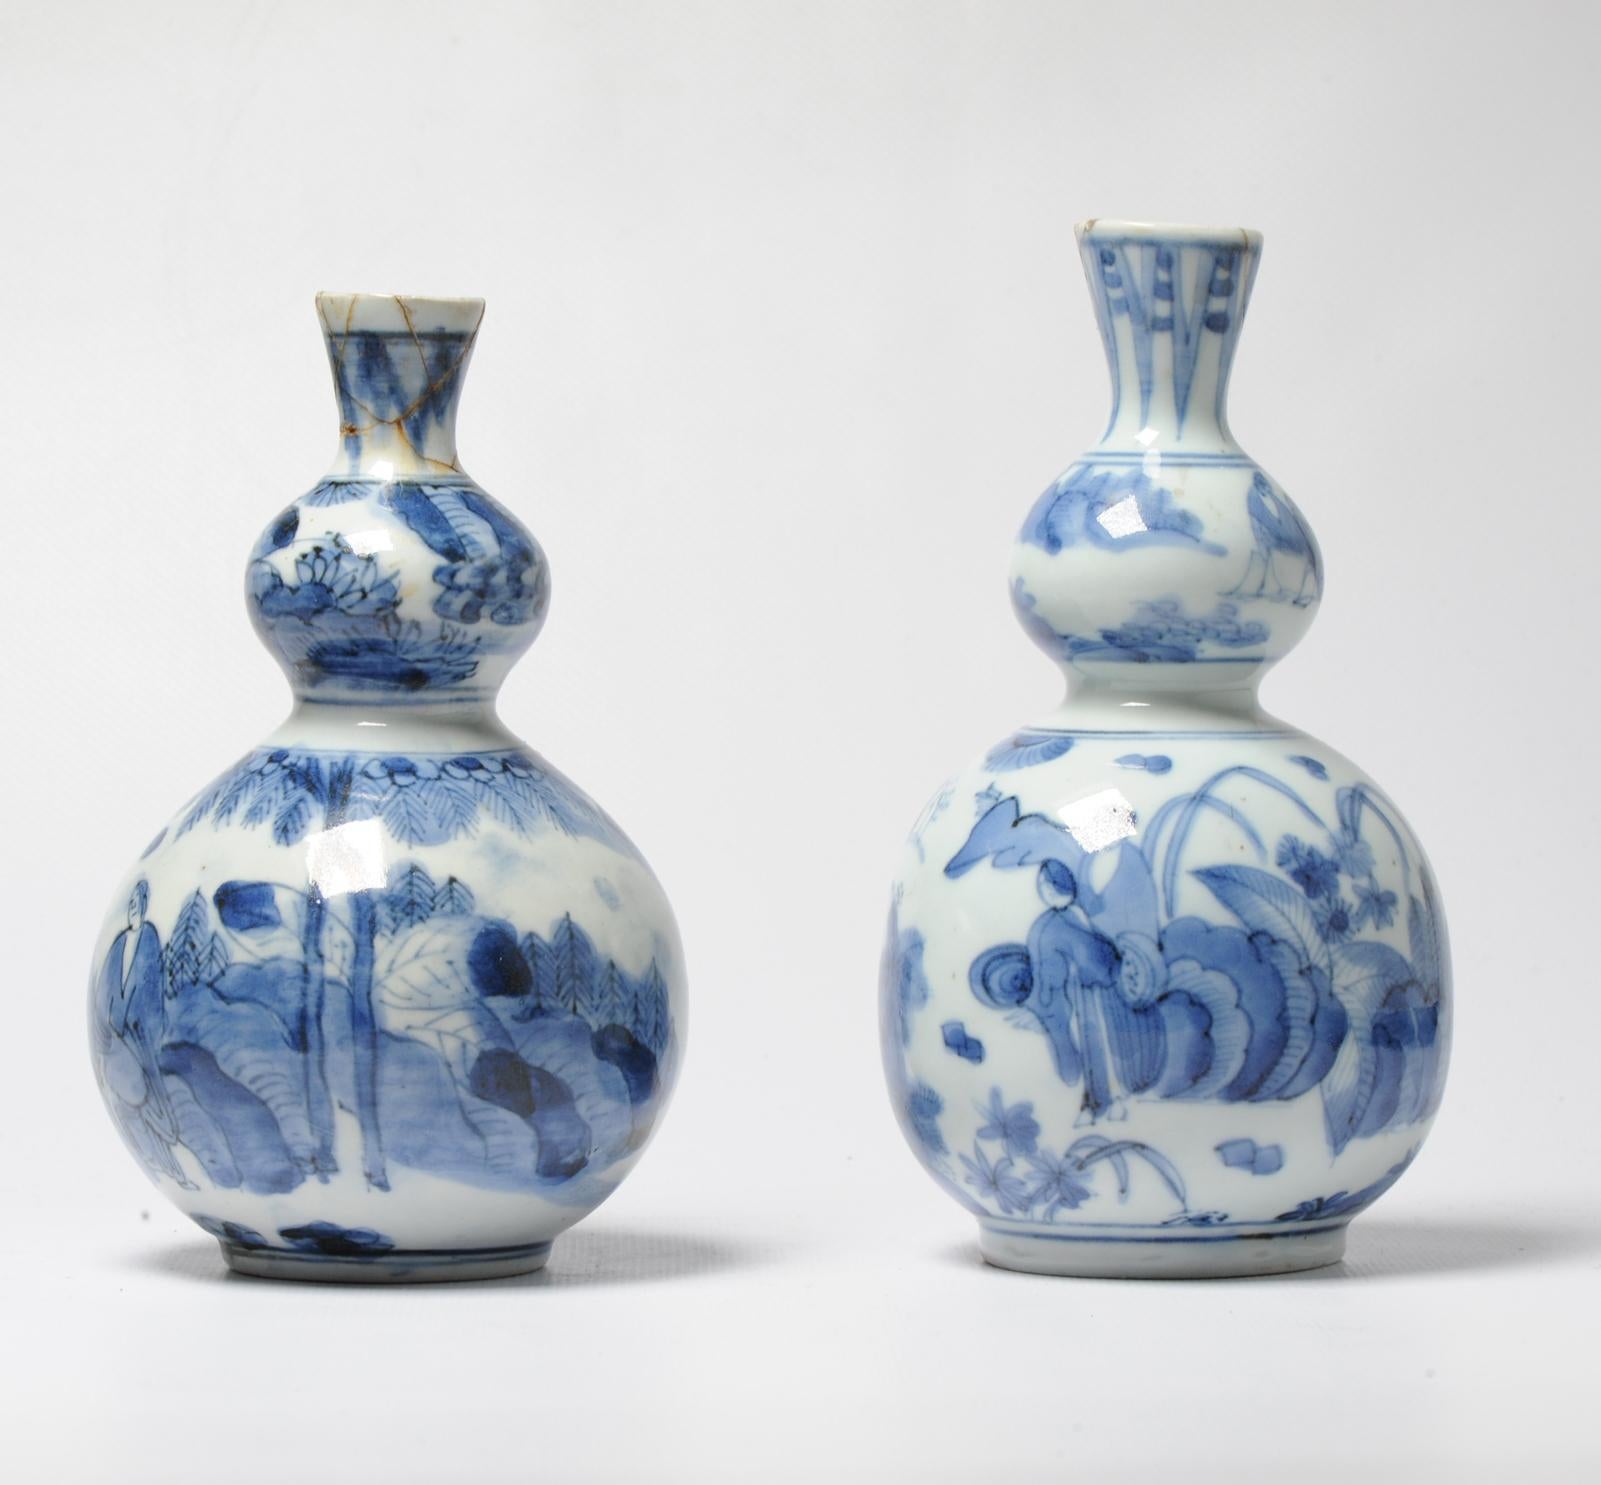 Lovely and very detailed pieces in display condition.

Scene of a figural landscape scene.

Additional information:
Material: Porcelain & Pottery
Japanese Style: Arita
Region of Origin: Japan
Period: 17th century, 18th century Edo Period